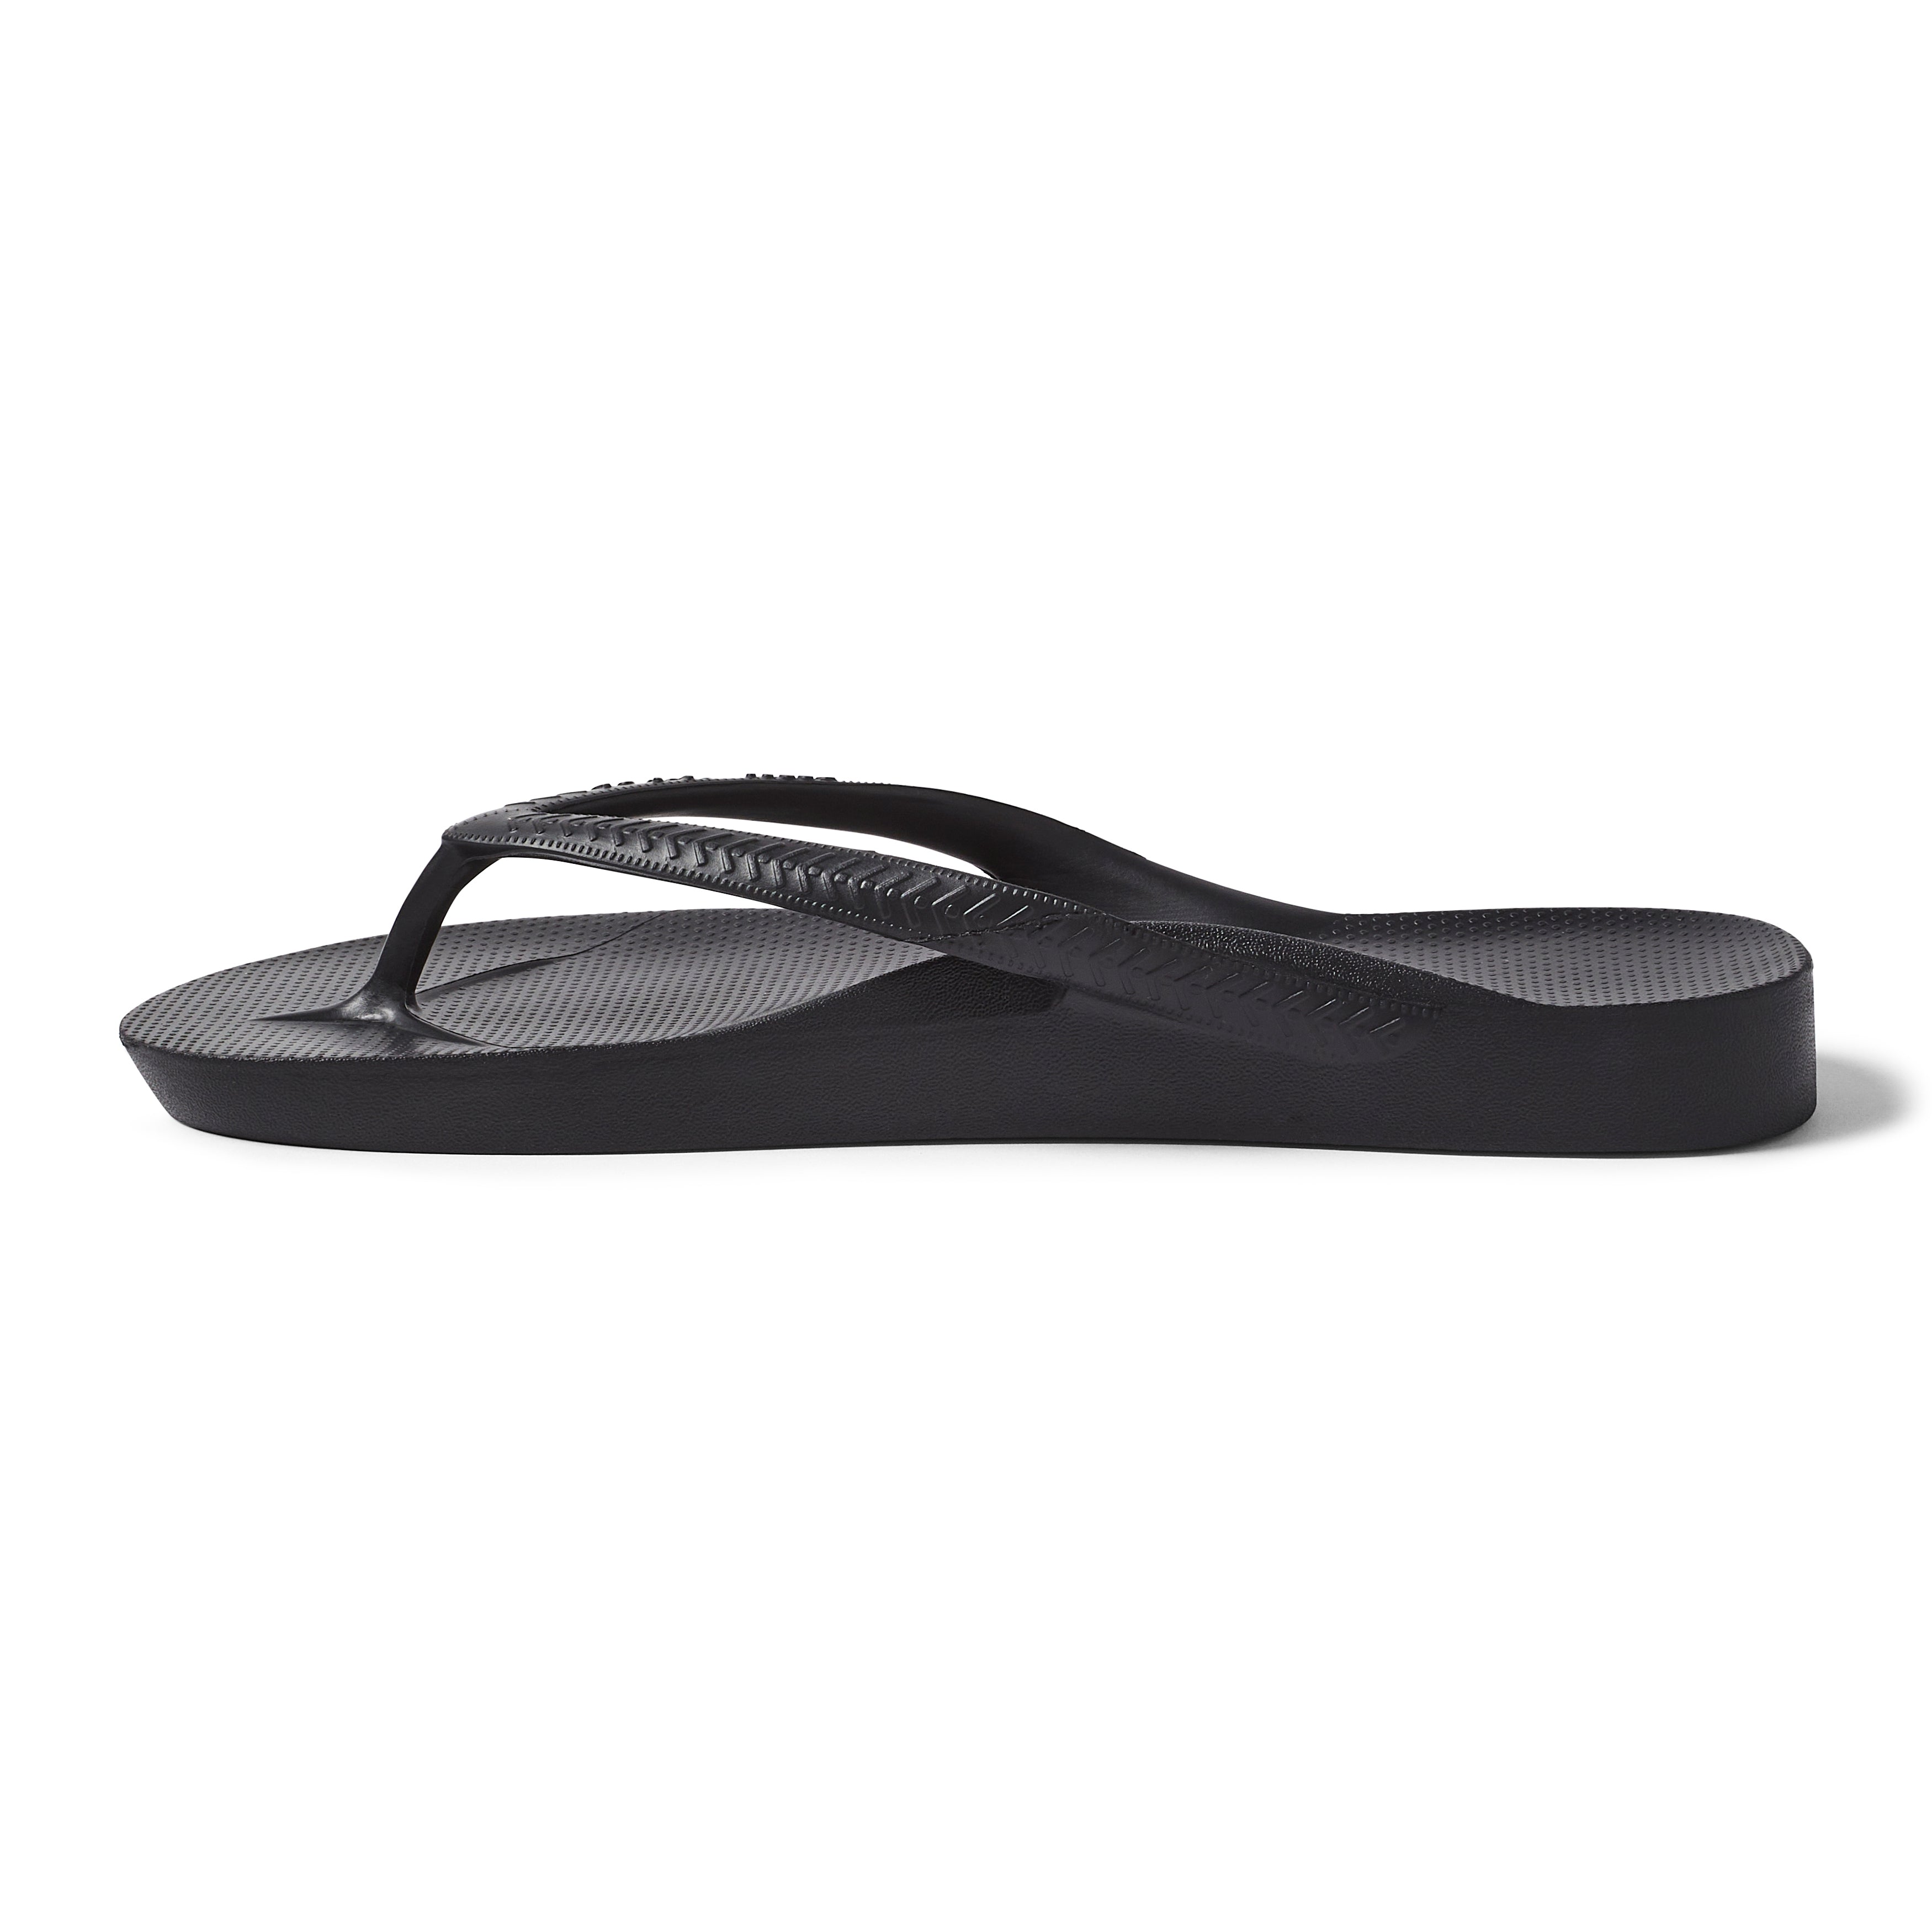 Cameland Archies Flip Flops Arch Support Womens Beach Open Toe Orthopedic  Sandals Summer Non-Slip Causal Breathable Wedge Sandals for Women, Up to  65% off! 